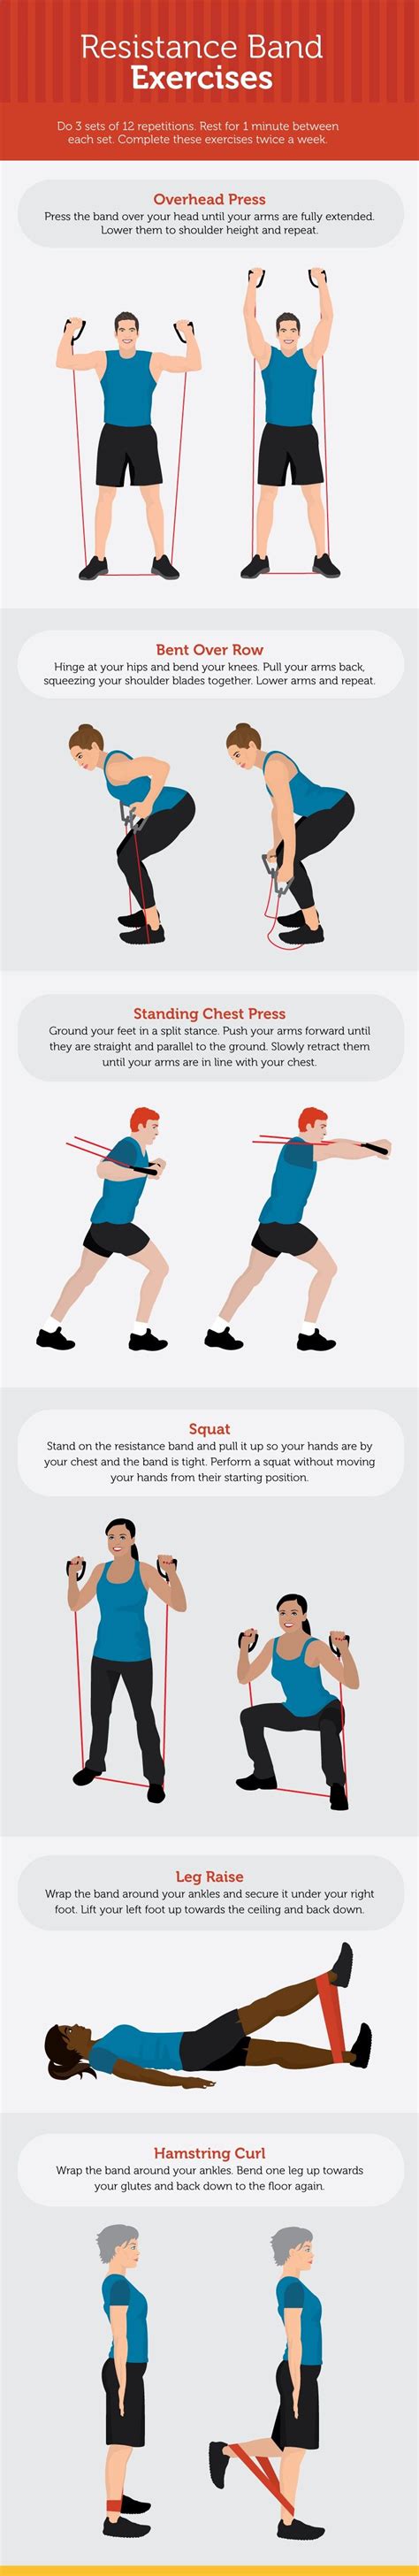 Resistance Band Exercises Posted By Newhowtolosebelly Band Workout Resistance Band